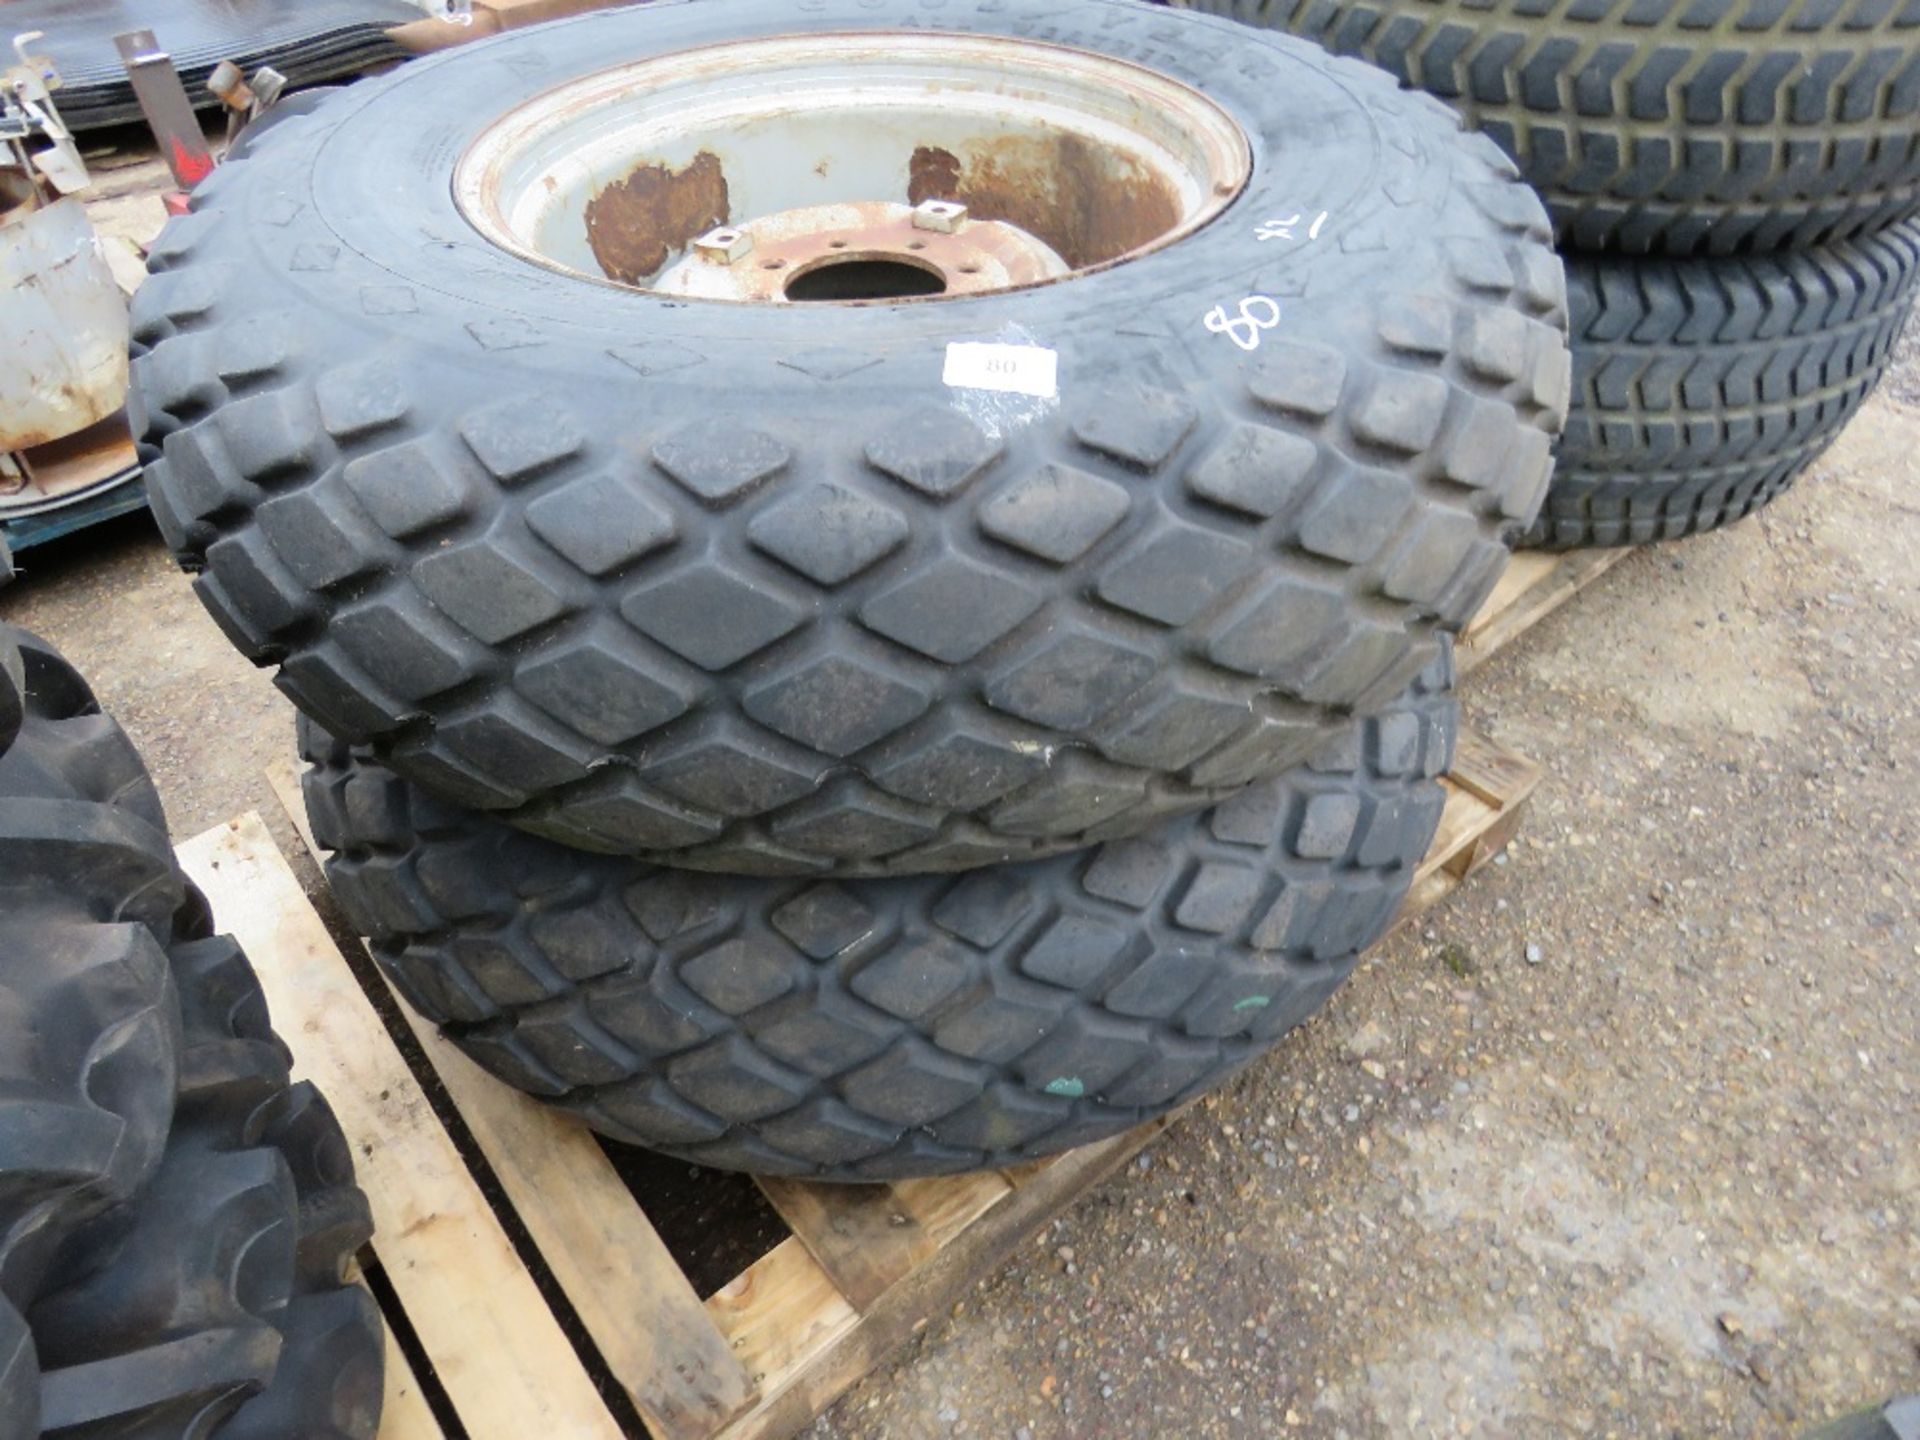 2 X WHEEL AND TYRES, GOODYEAR GRASS TREAD PATTERN SIZE 14.9-24 FOR COMPACT TRACTOR.